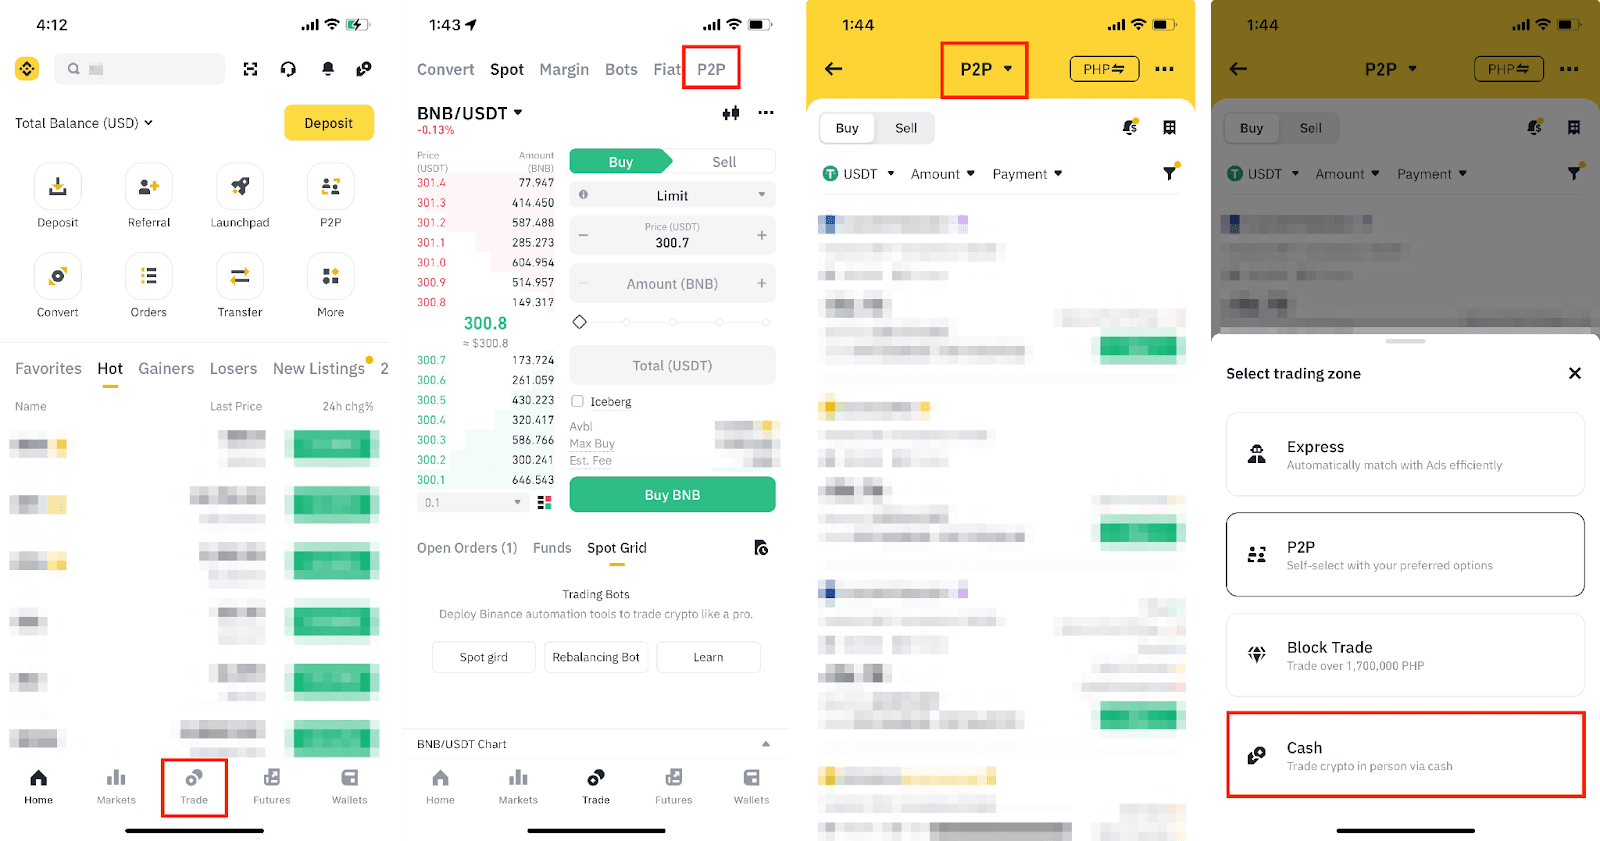 How To Buy On Binance - Complete Step-by-Step Guide ()